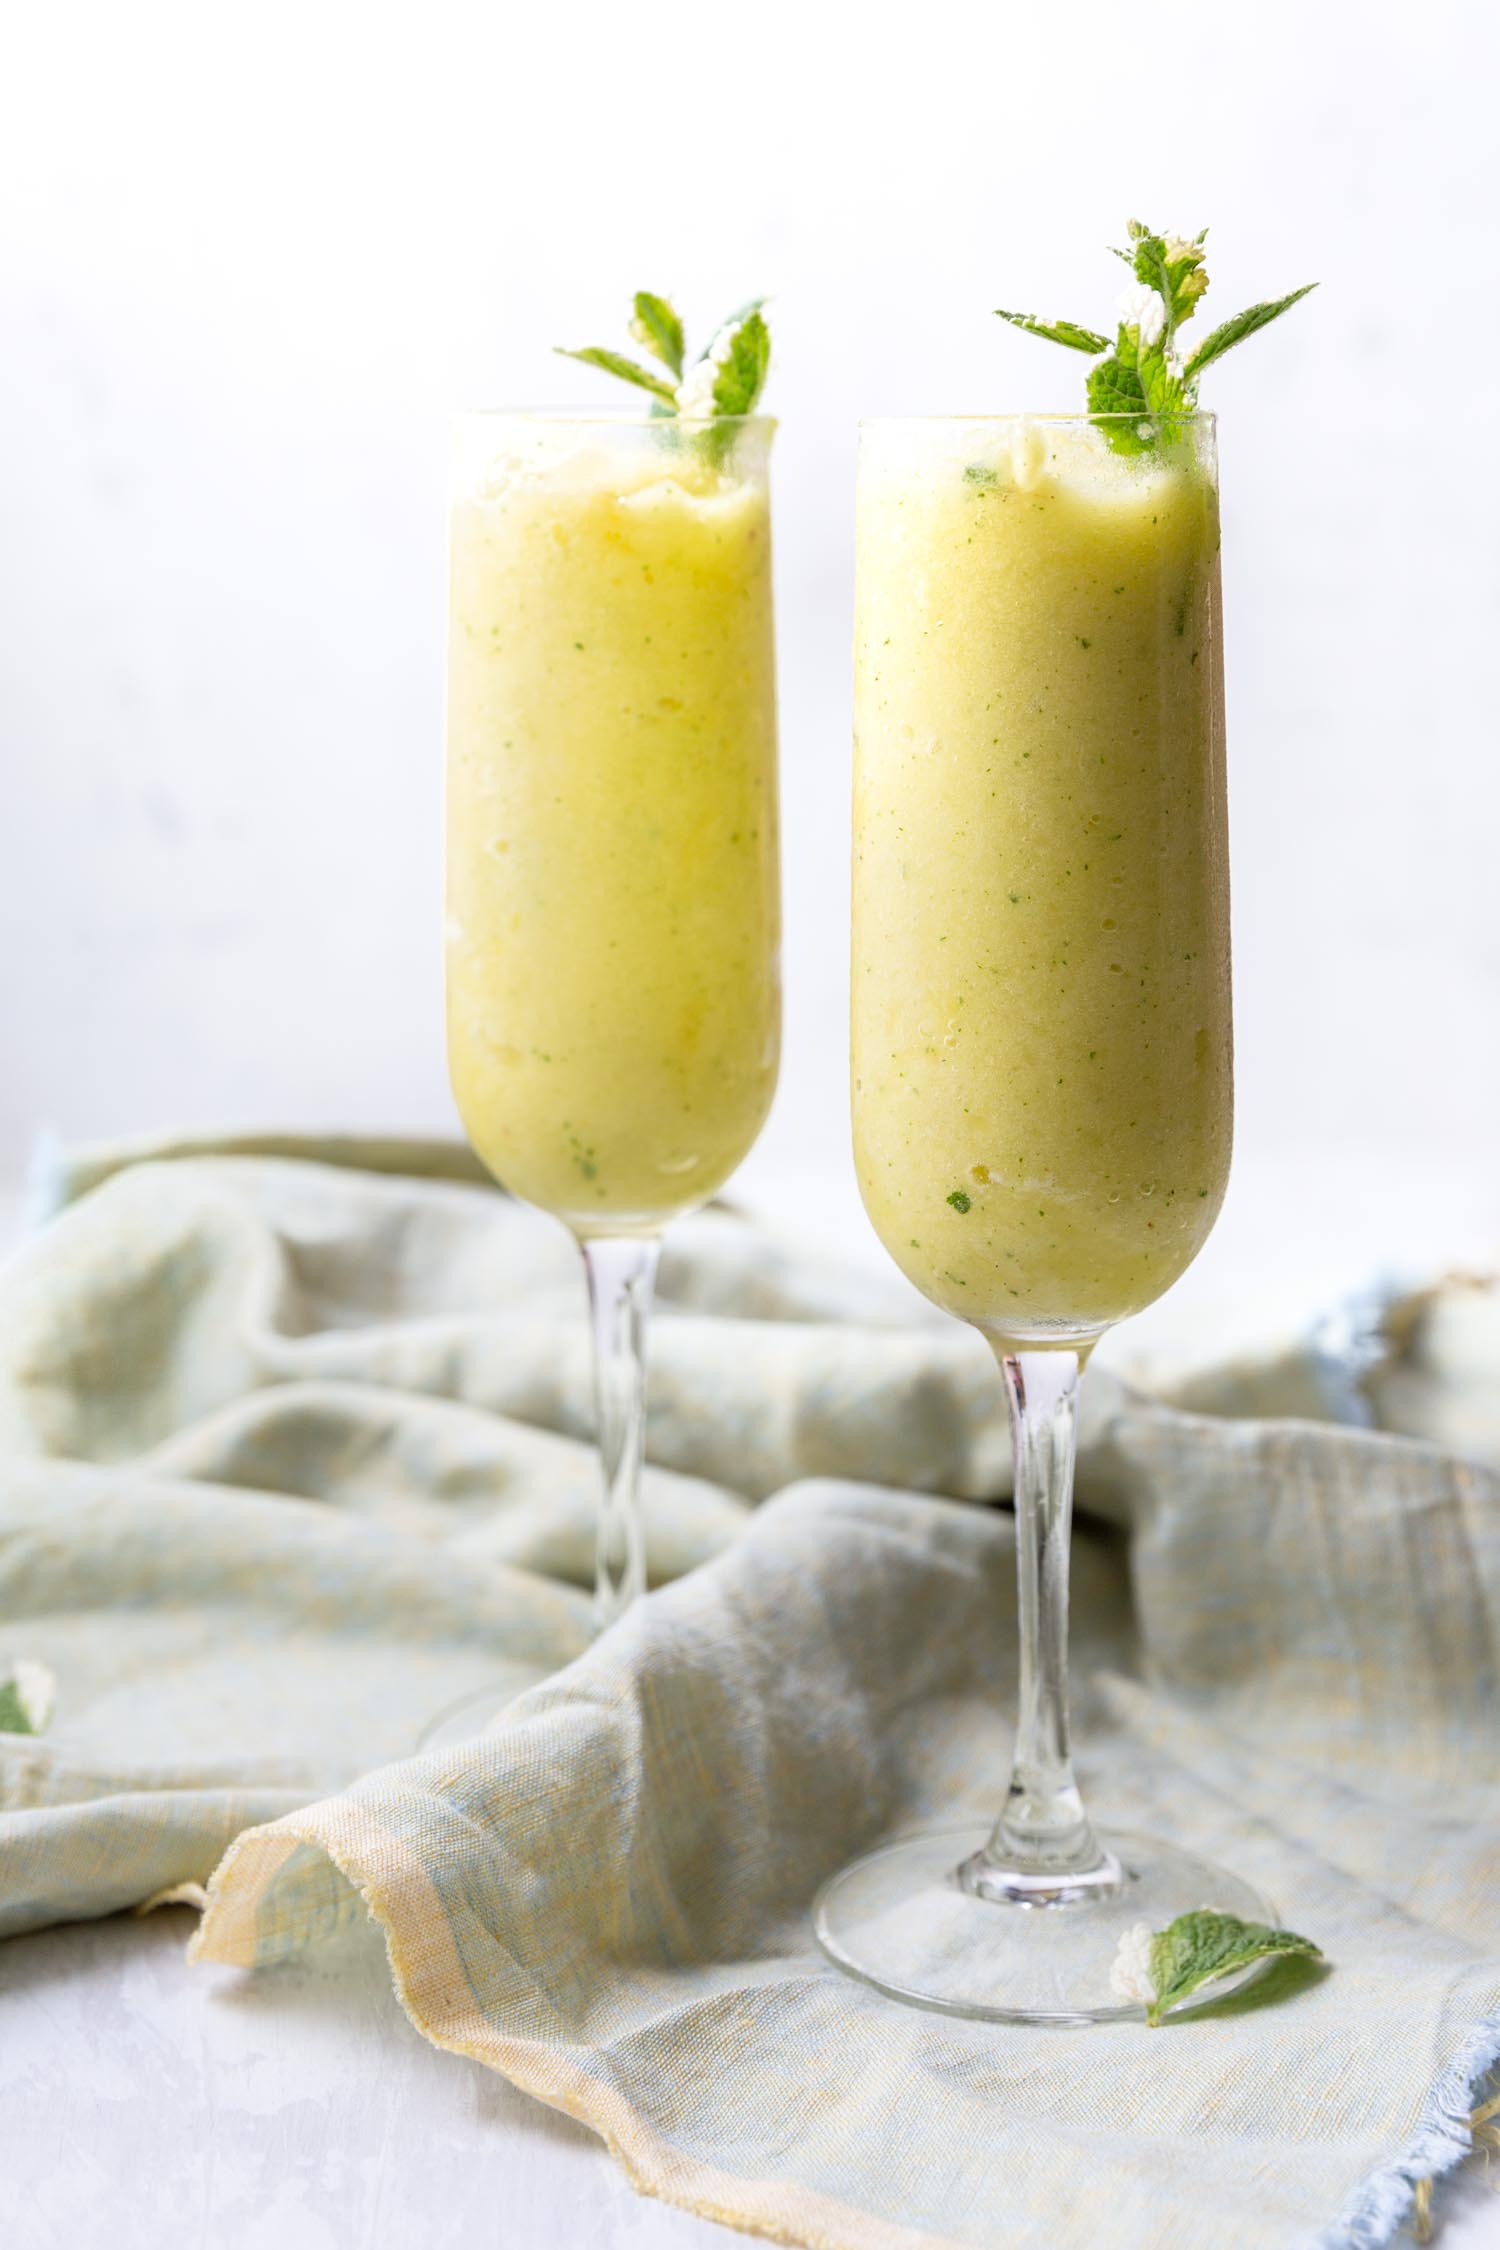 Pineapple Mint Frozen Drinks require just two ingredients (+ water) for a delicious and refreshing mocktail - add your favorite spirits for the ideal summery cocktail. #summerdrink #summercocktail #cocktail #pineapple #pineapplemintrecipe #drinkrecipe #frozendrink #blended #mocktail #fruitydrink #tropicaldrink #mojito